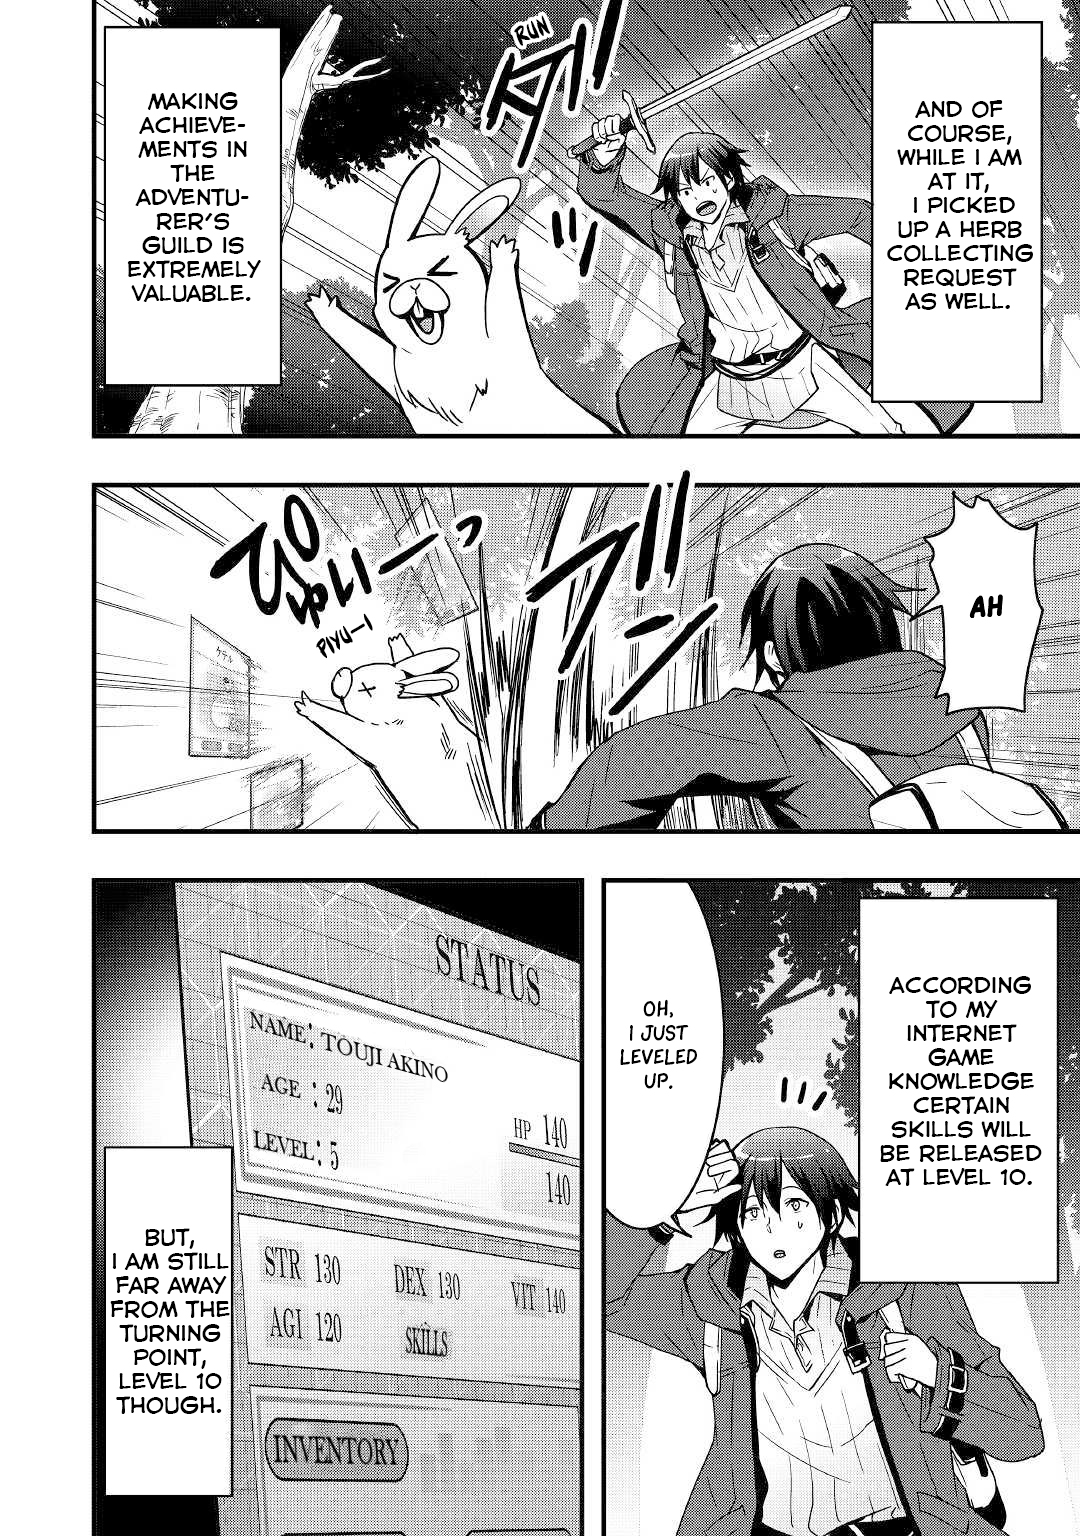 I will Live Freely in Another World with Equipment Manufacturing Cheat Vol. 1 Ch. 2